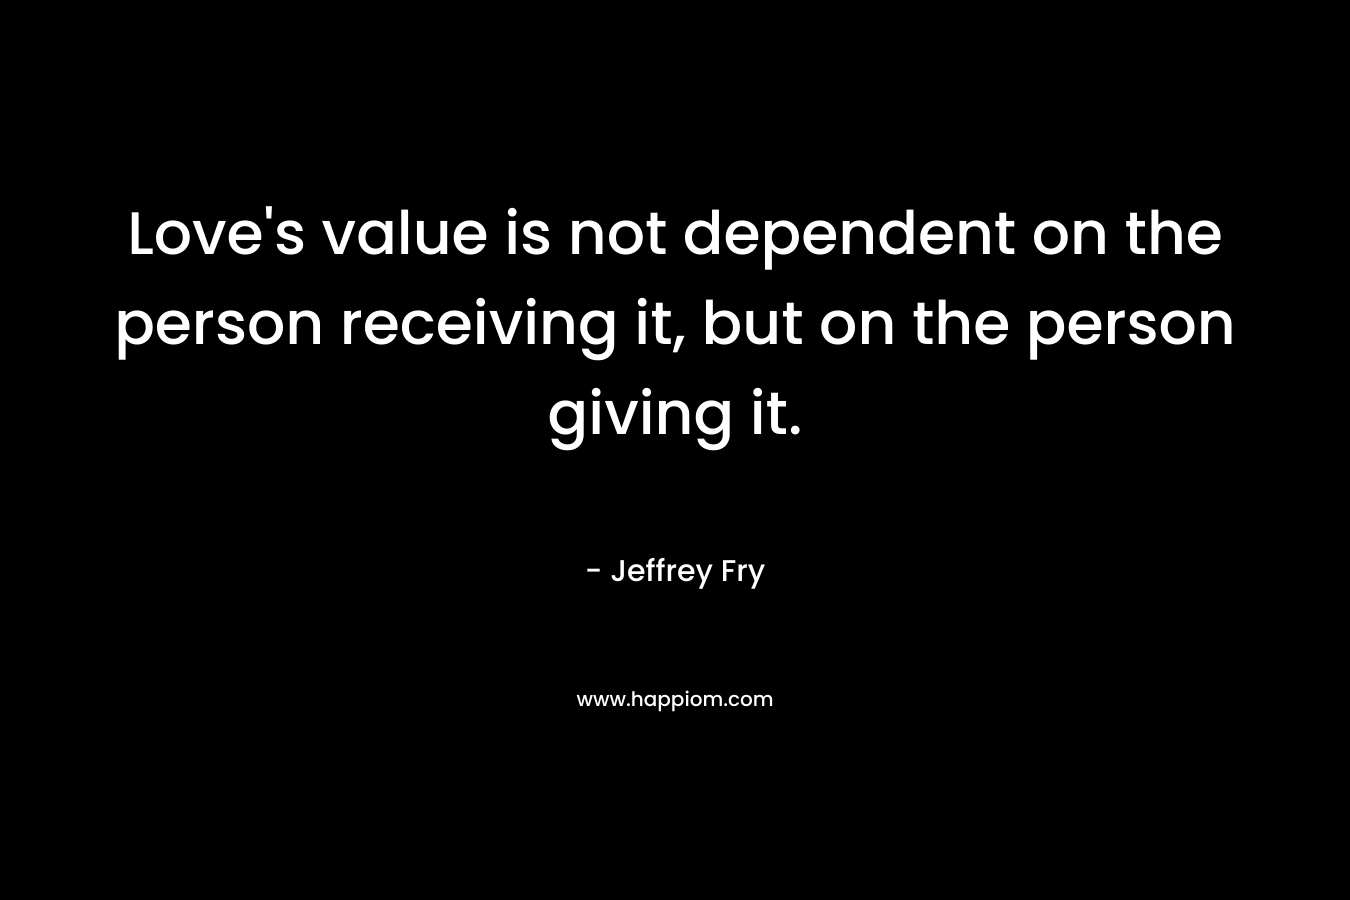 Love’s value is not dependent on the person receiving it, but on the person giving it. – Jeffrey Fry